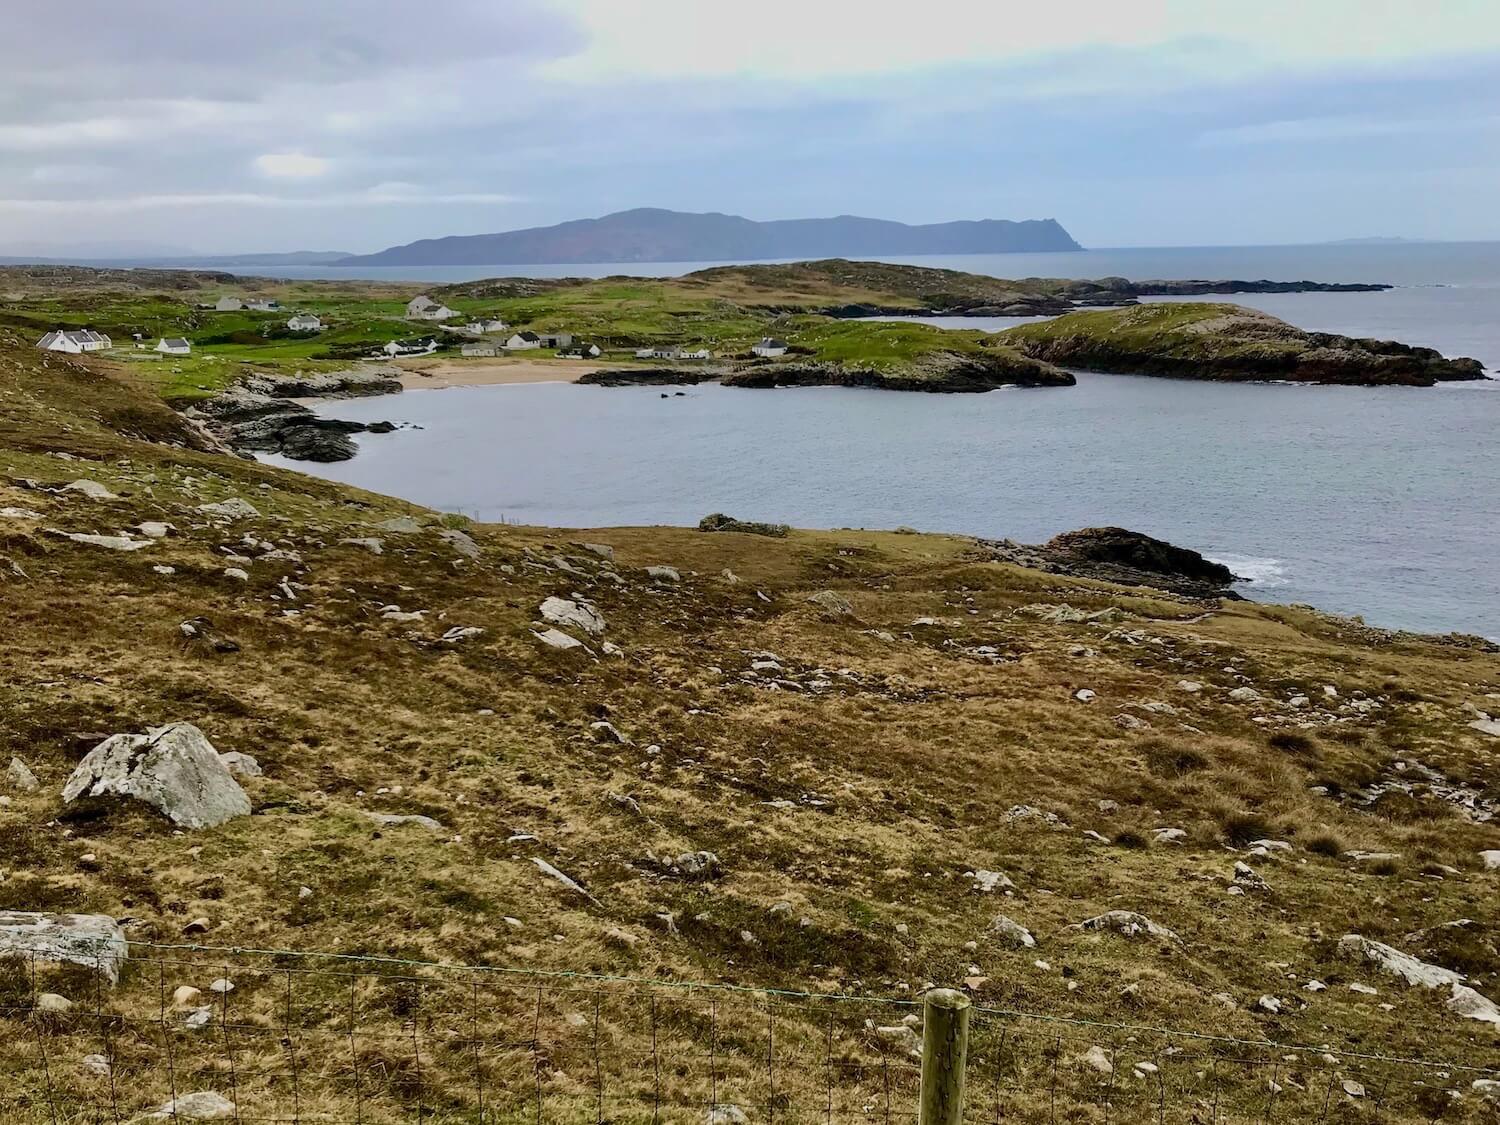 This view of Horn Head is from the vantage point of the Northern coast of Donegal and shows how rocky the coastline can be, while a sandy beach leads to an enclave of homes nestled between the rolling hills. 